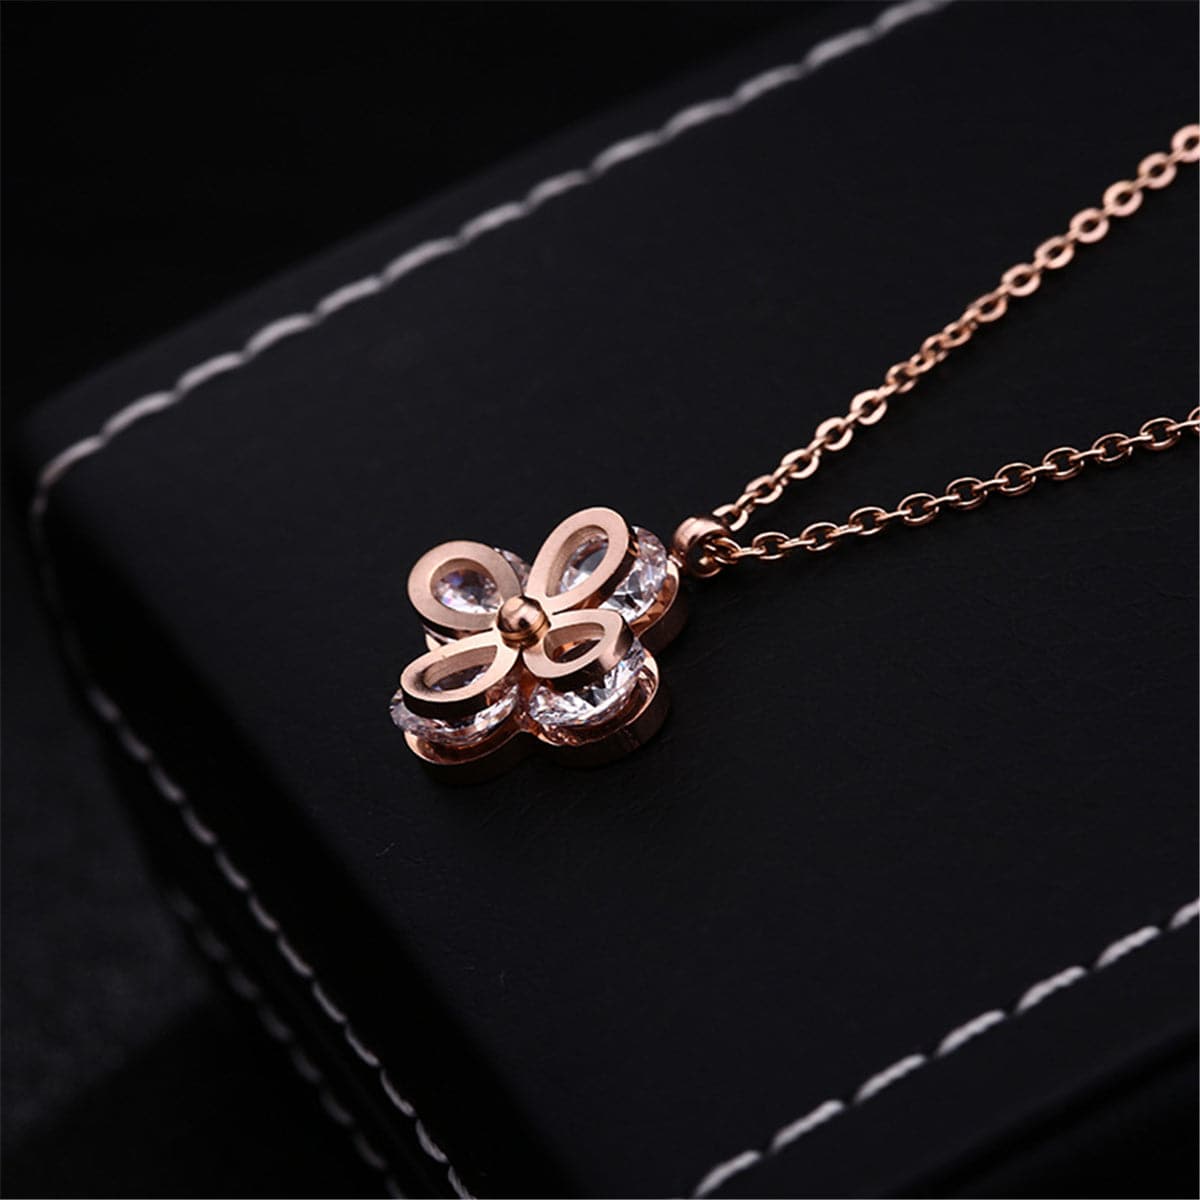 Crystal & 18k Rose Gold-Plated Clipped Clover Pendant Necklace - streetregion